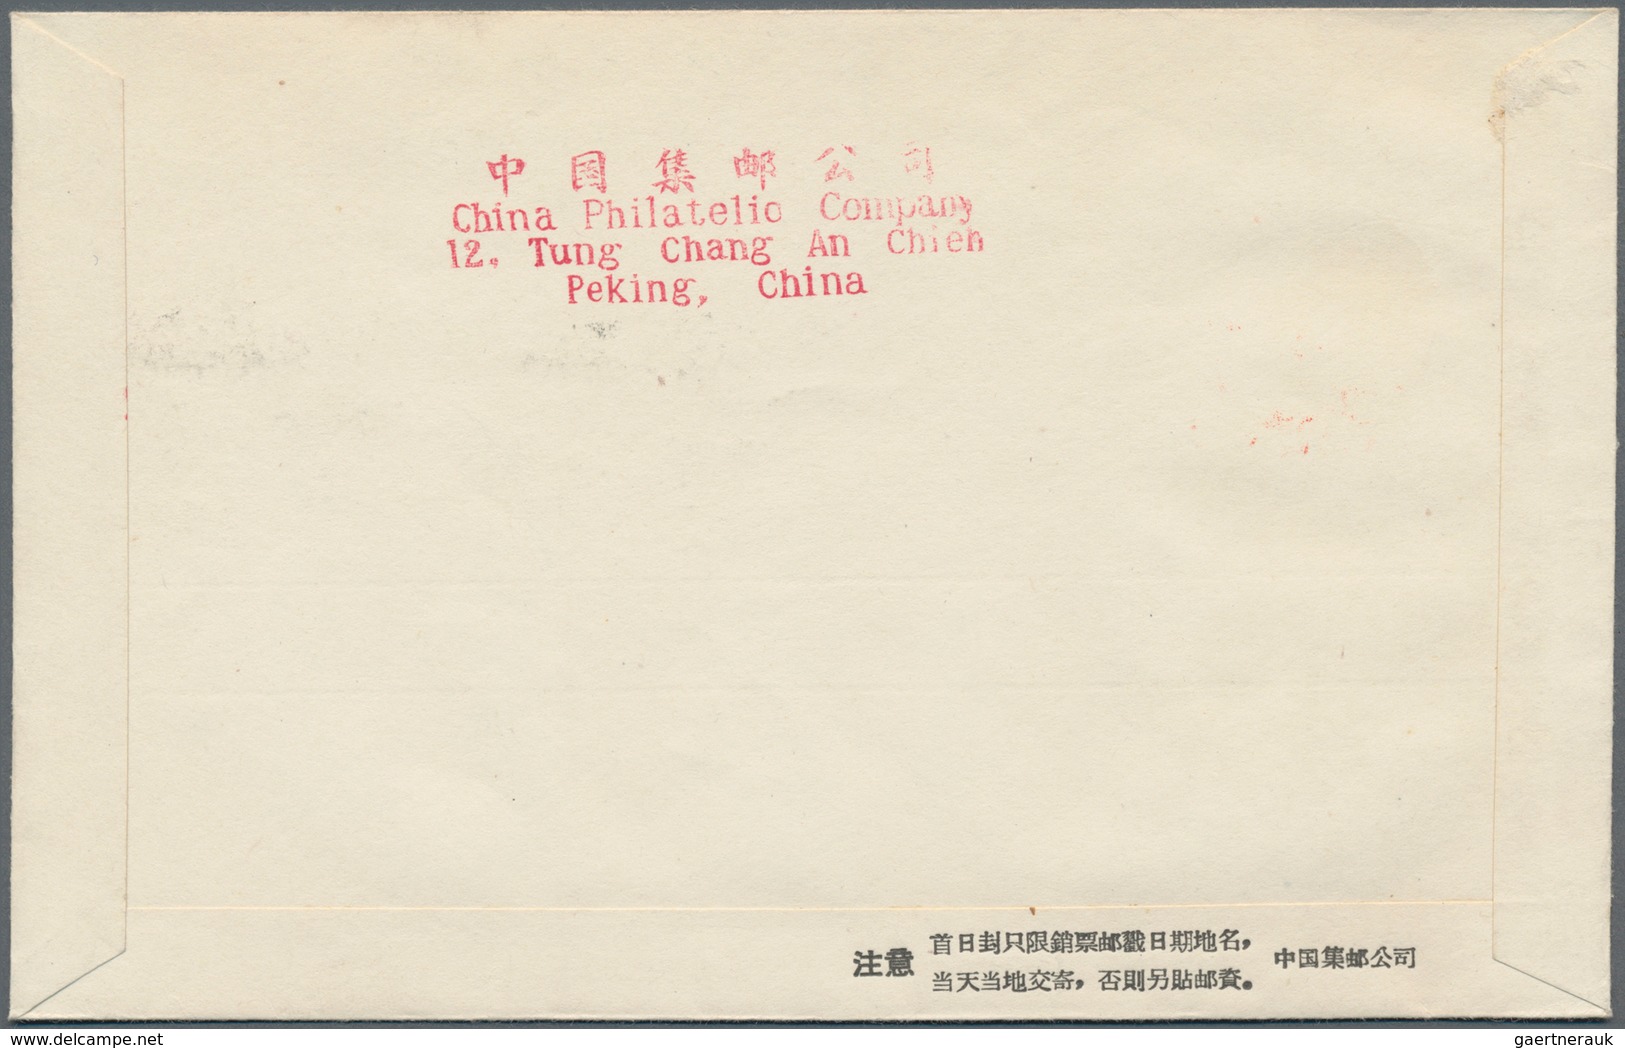 China - Volksrepublik: 1960/61, Chrysanthemums (S44), complete set of 18 used on 6 official FDCs, ti